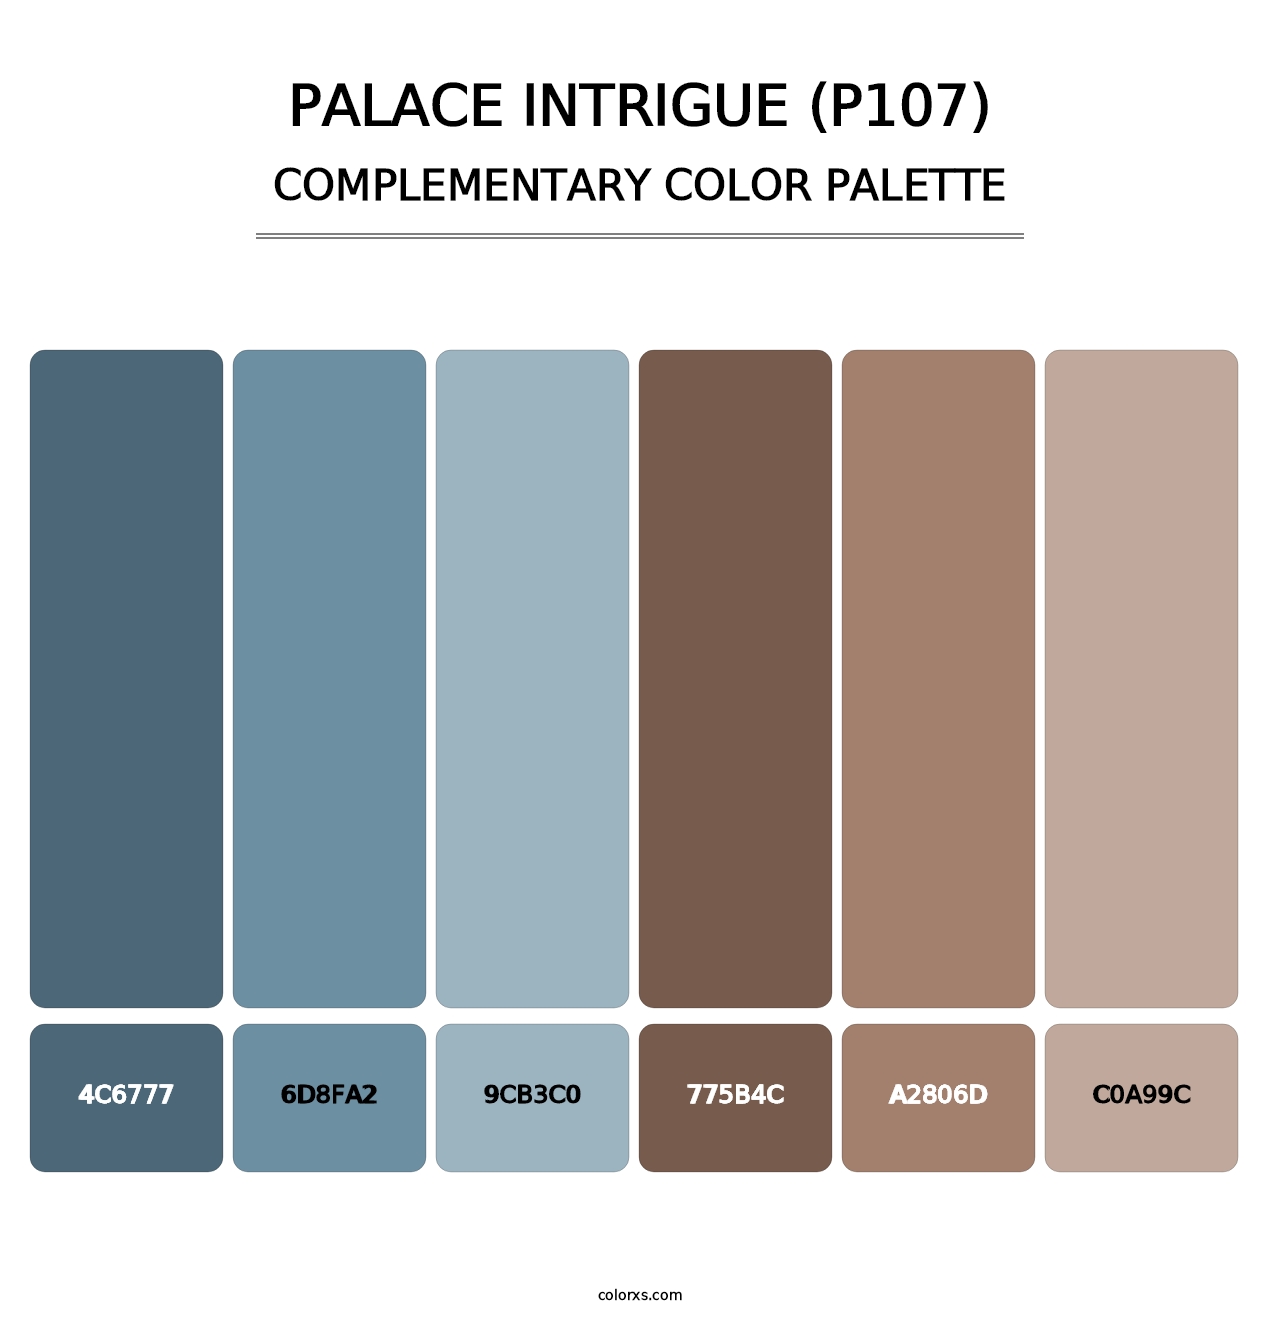 Palace Intrigue (P107) - Complementary Color Palette